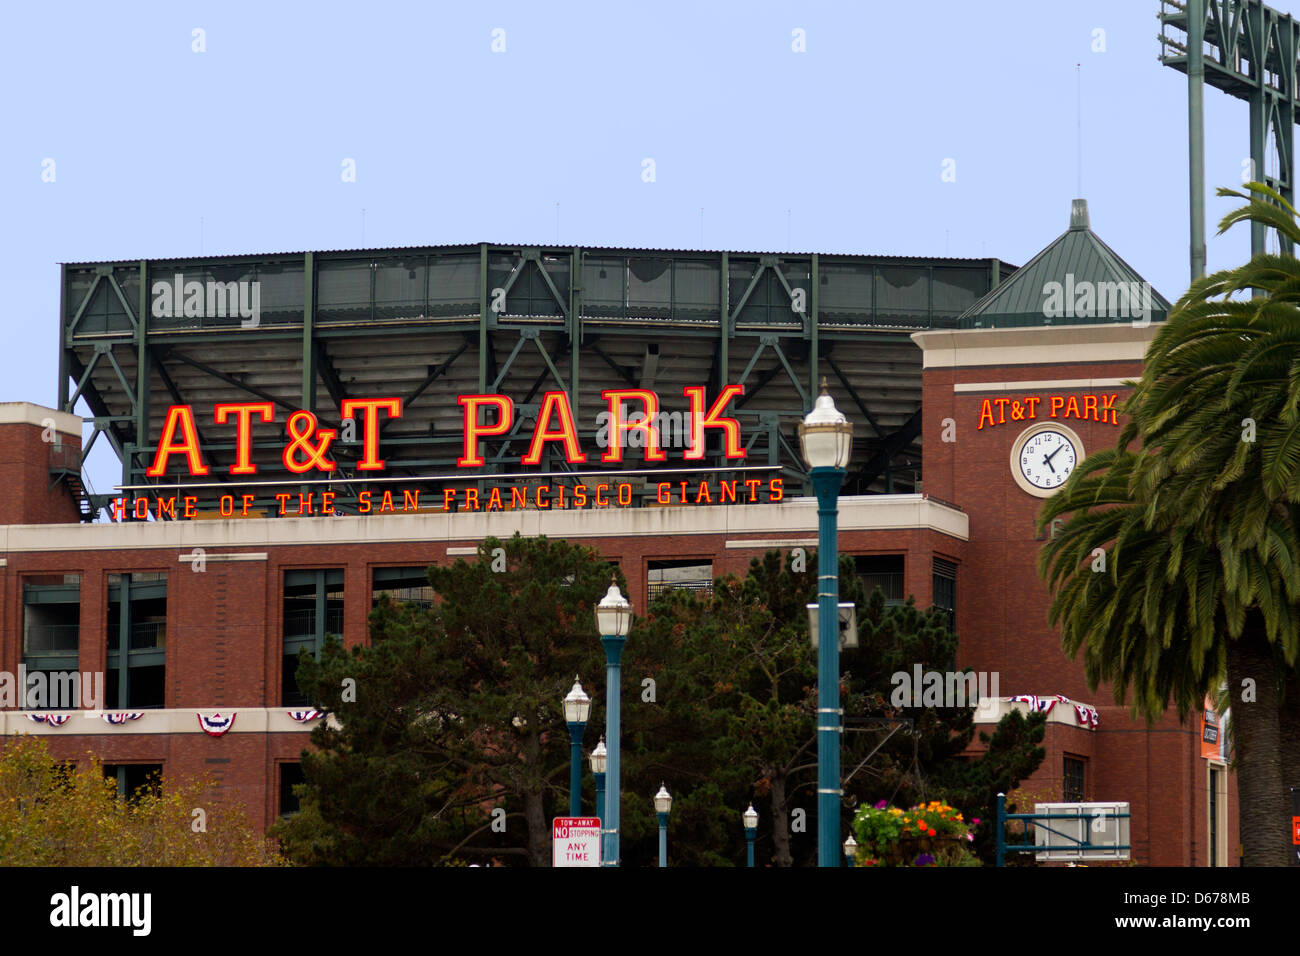 AT&T Park, home of the San Francisco Giants baseball team. Stock Photo